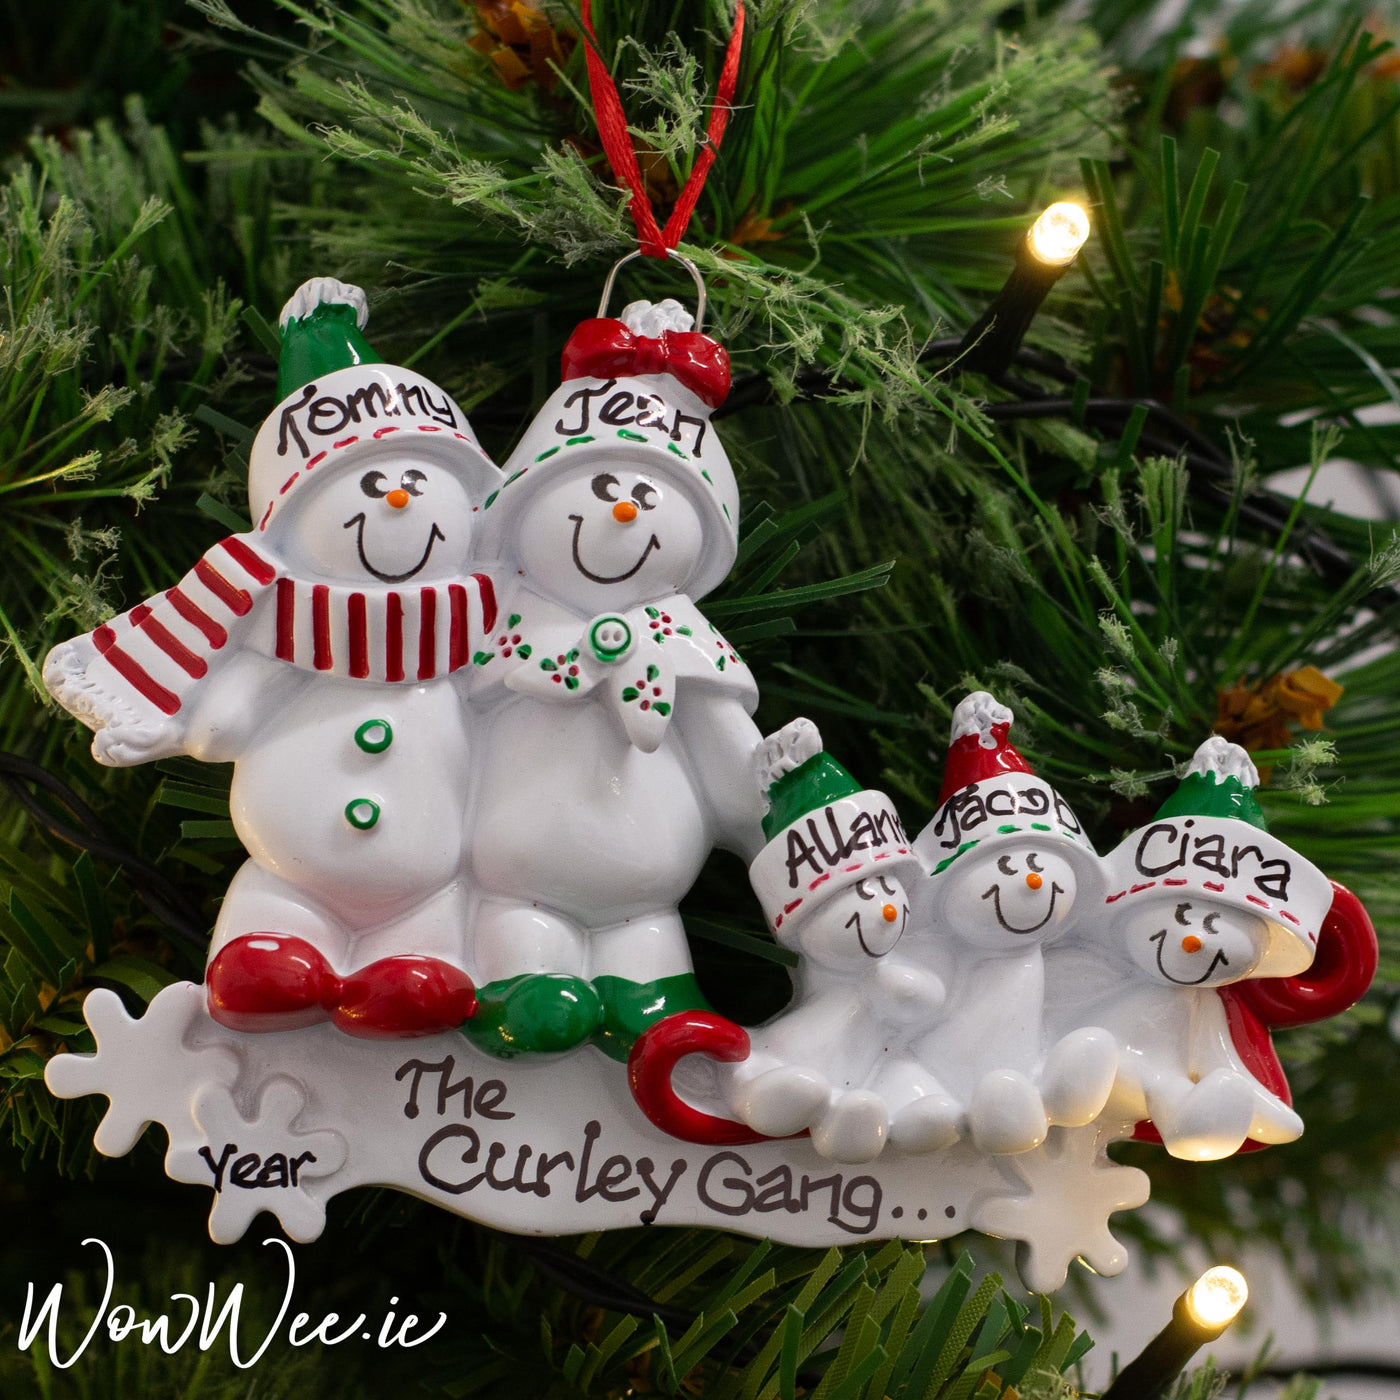 Personalised Christmas Decorations - Snowman Sled 5 - WowWee.ie Personalised Gifts